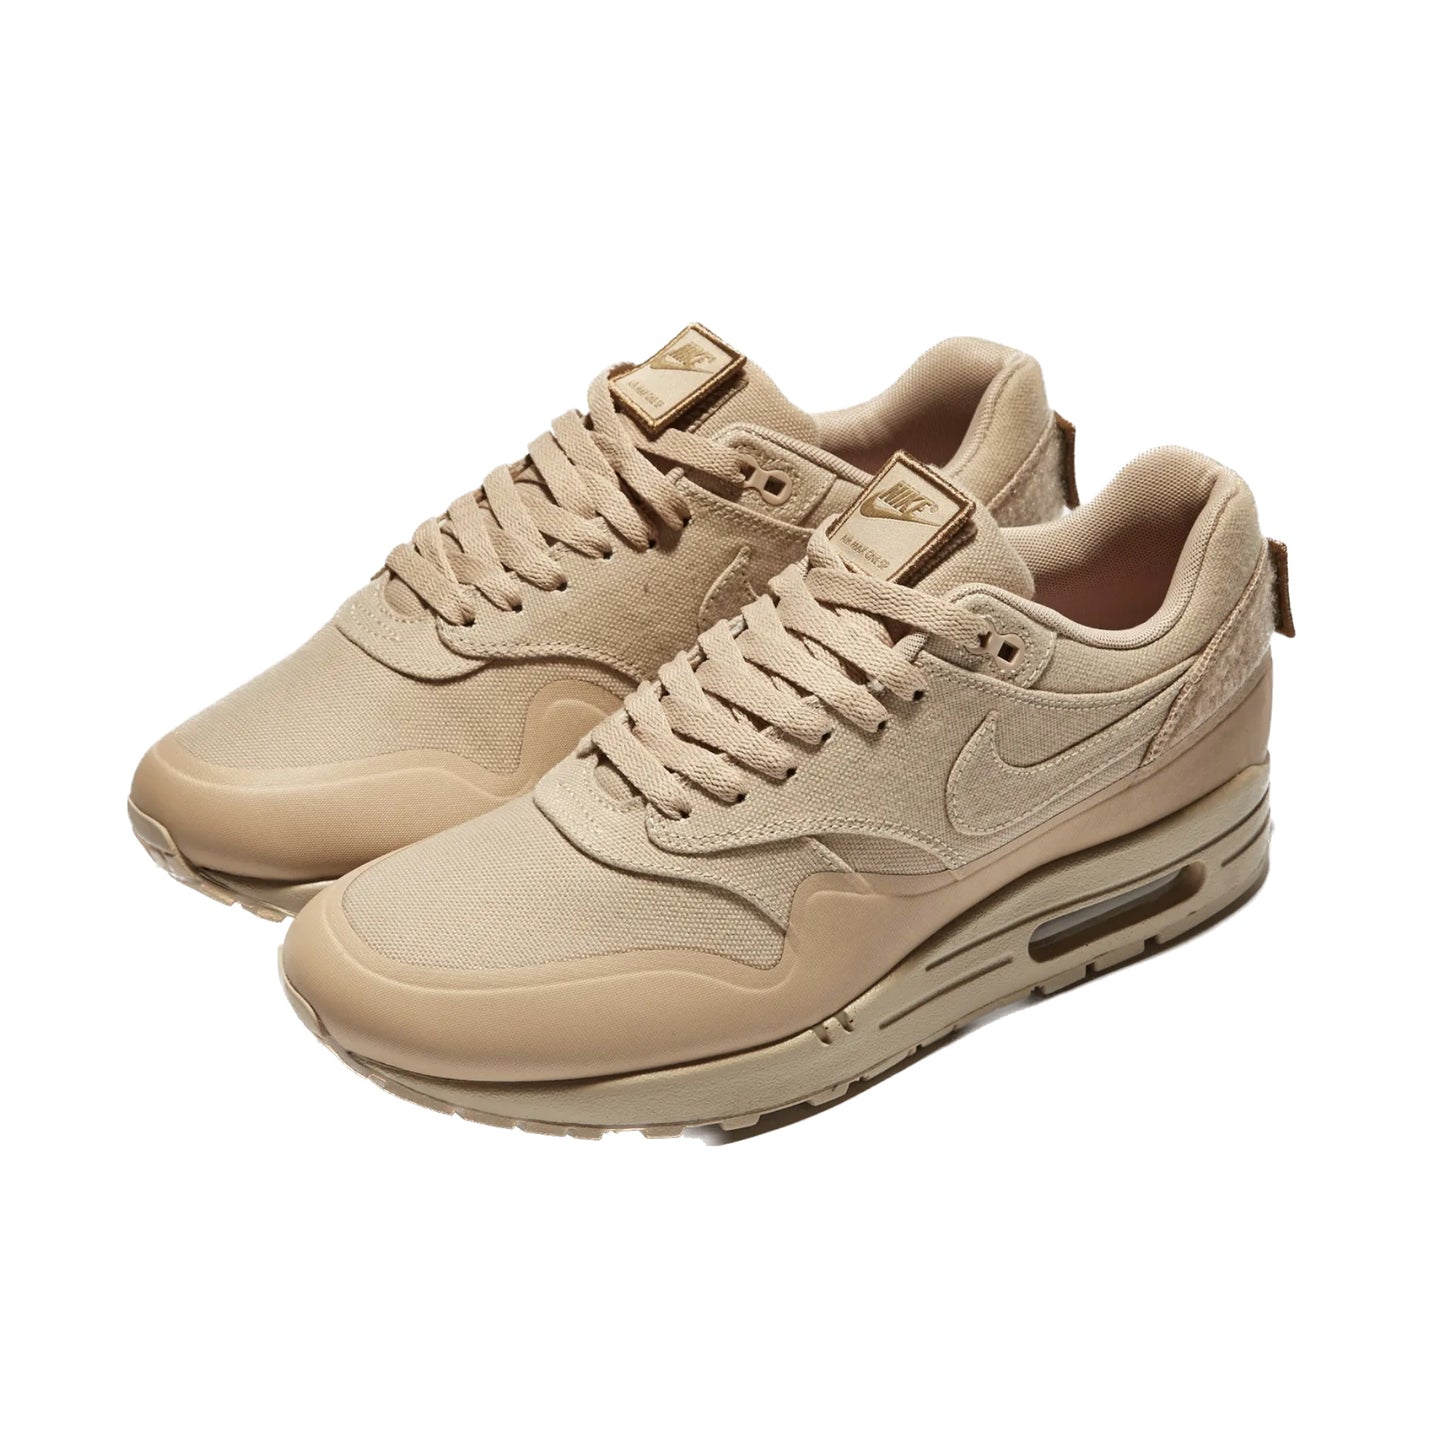 Nike Air Max 1 Patch Sand Sand 2014